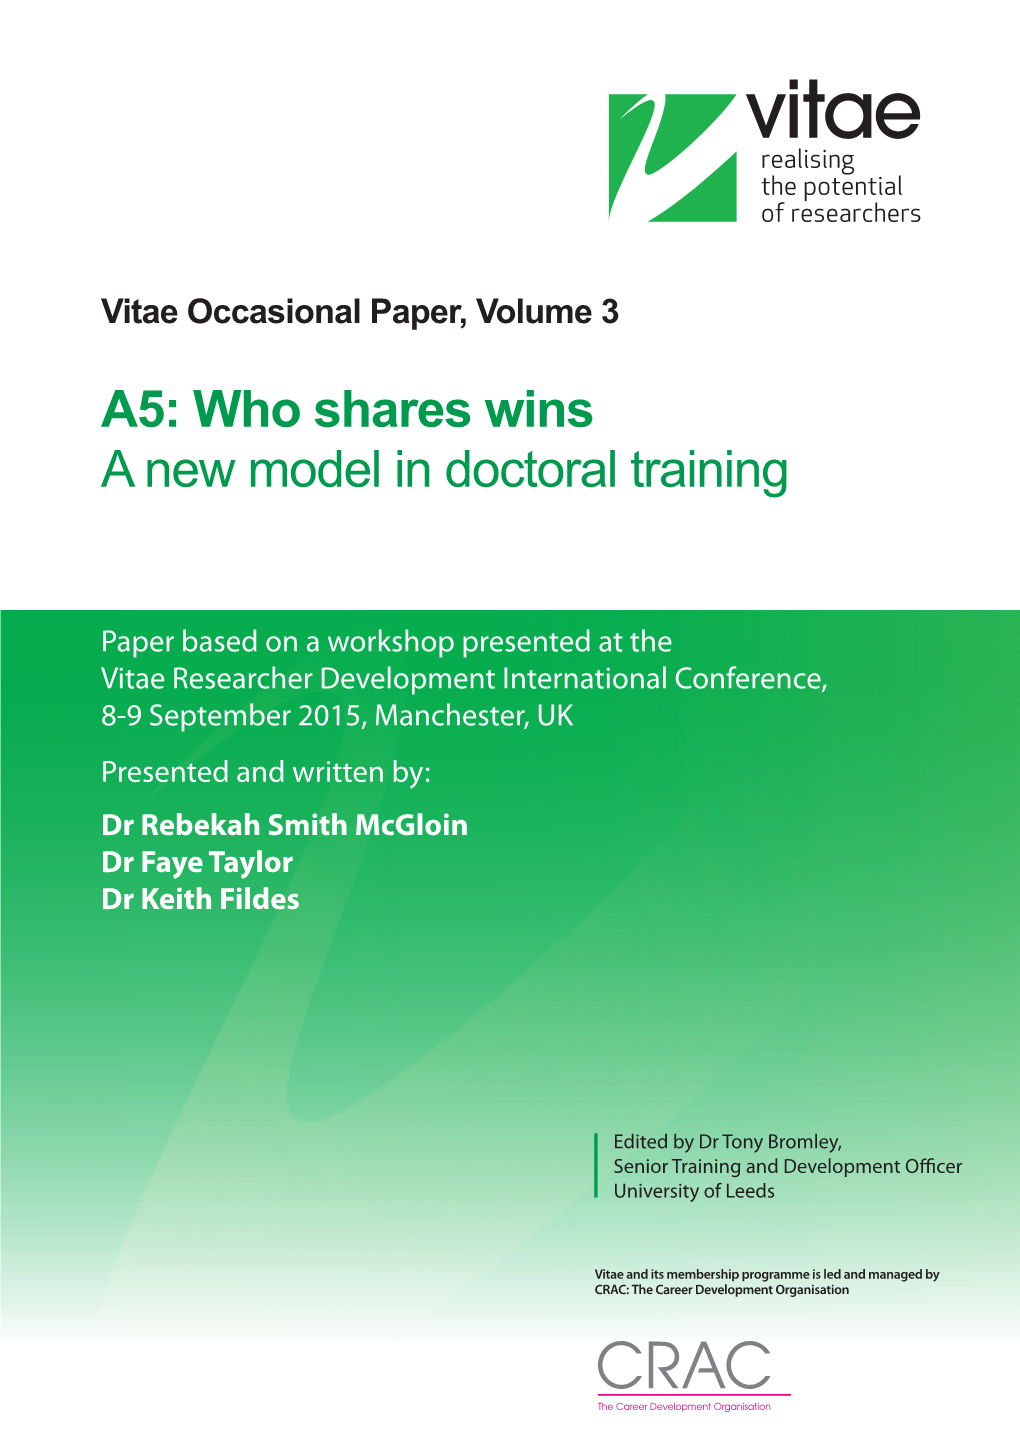 A5: Who Shares Wins a New Model in Doctoral Training